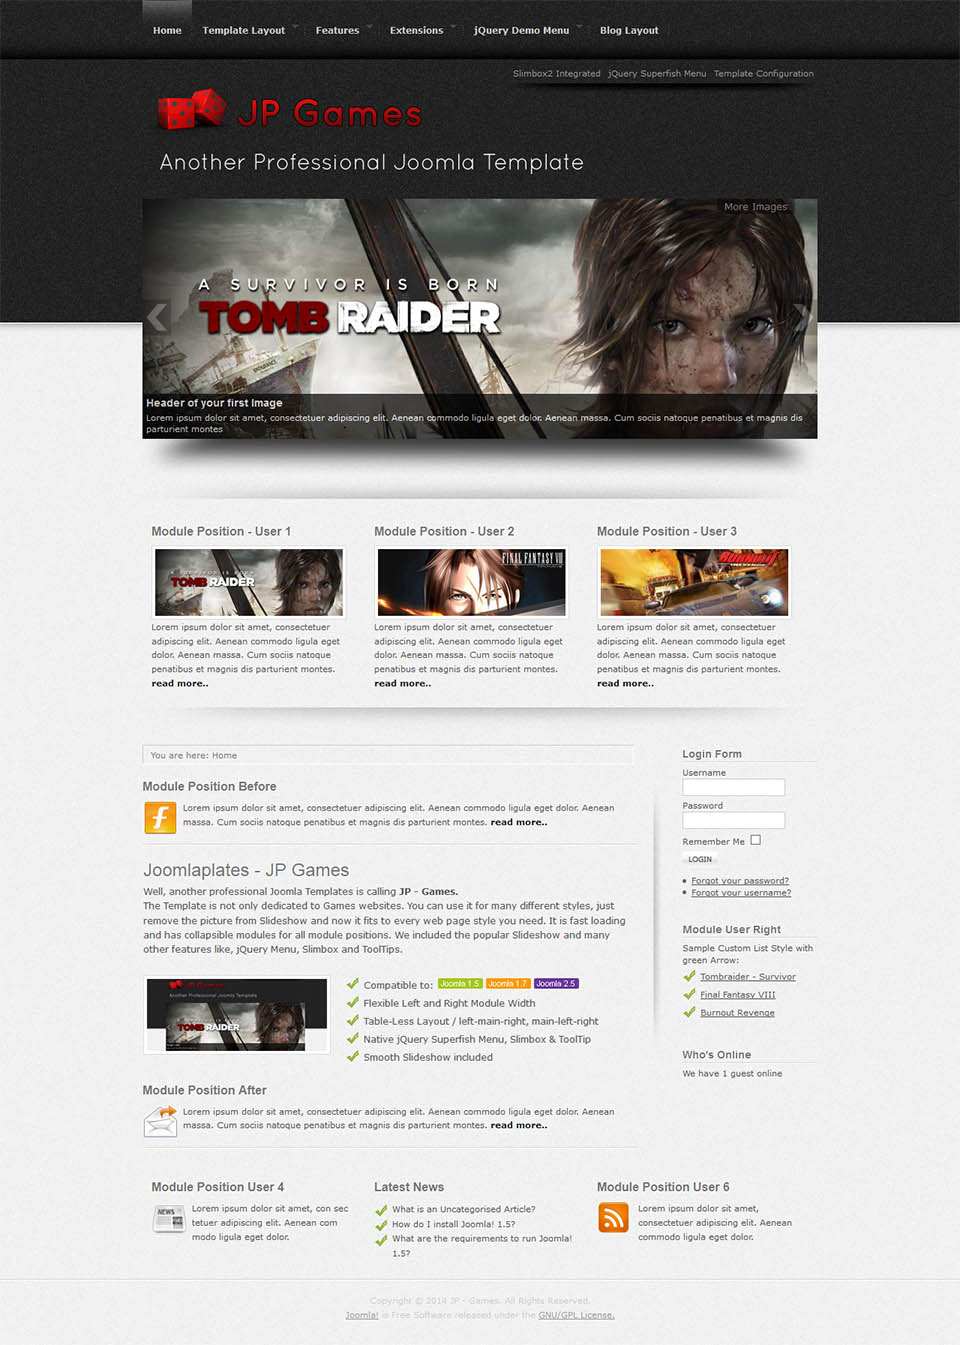 Download games and play free Website Template